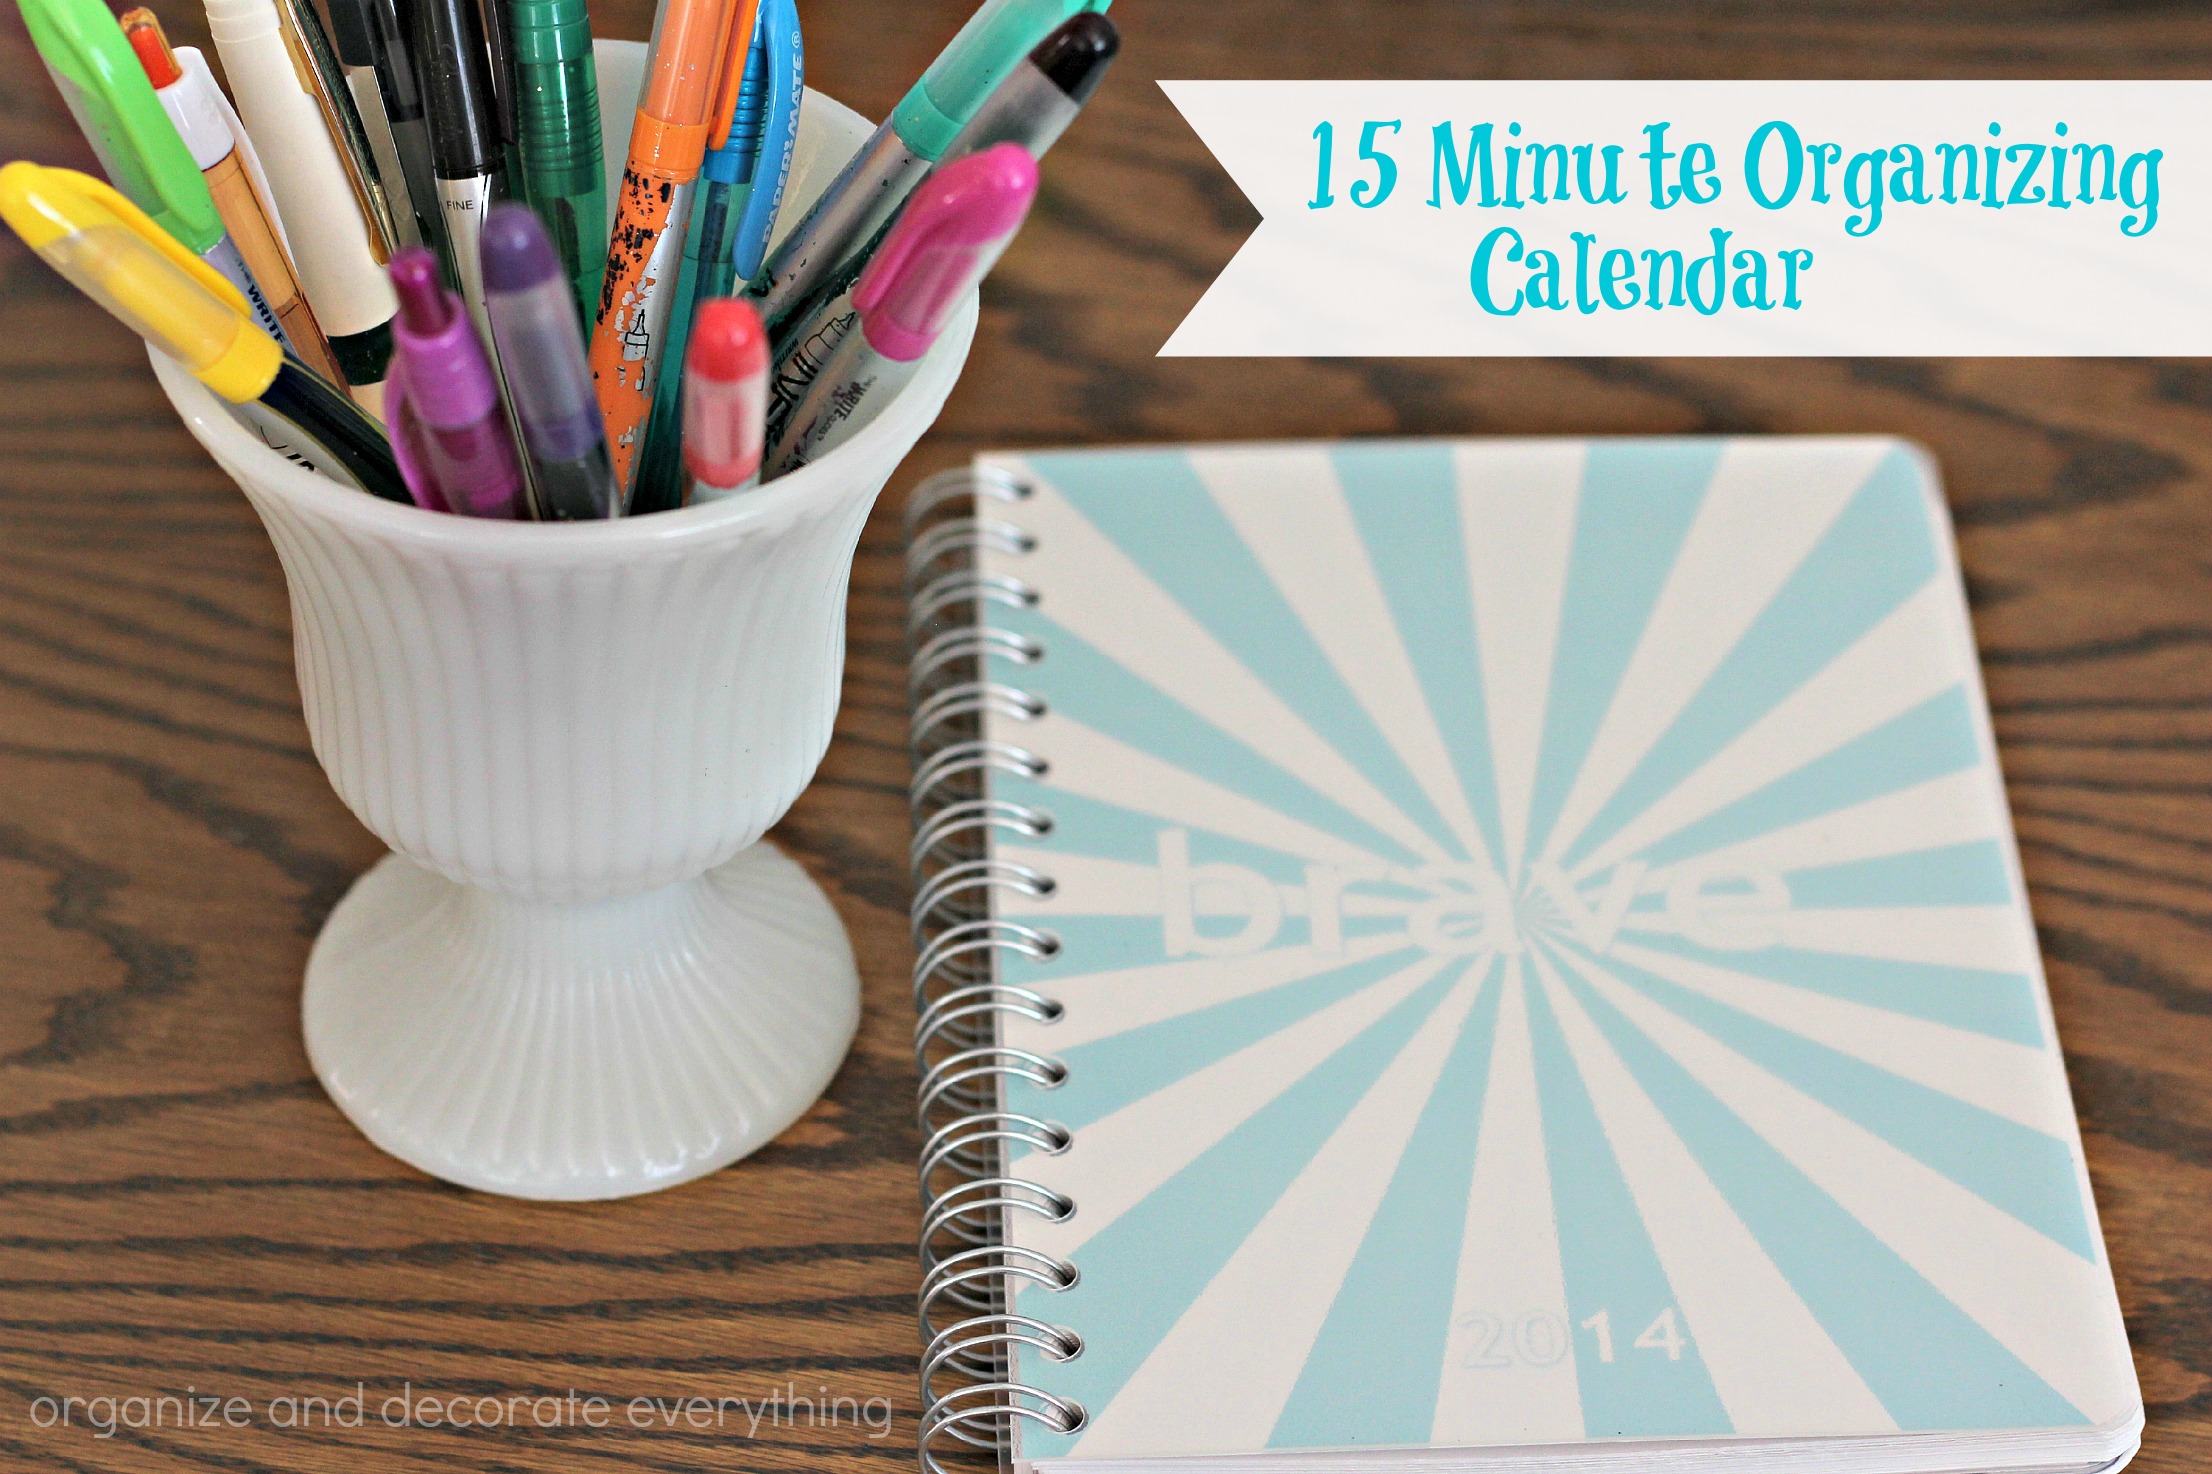 31 Days of 15 Minute Organizing Day 13 Calendar Organize and